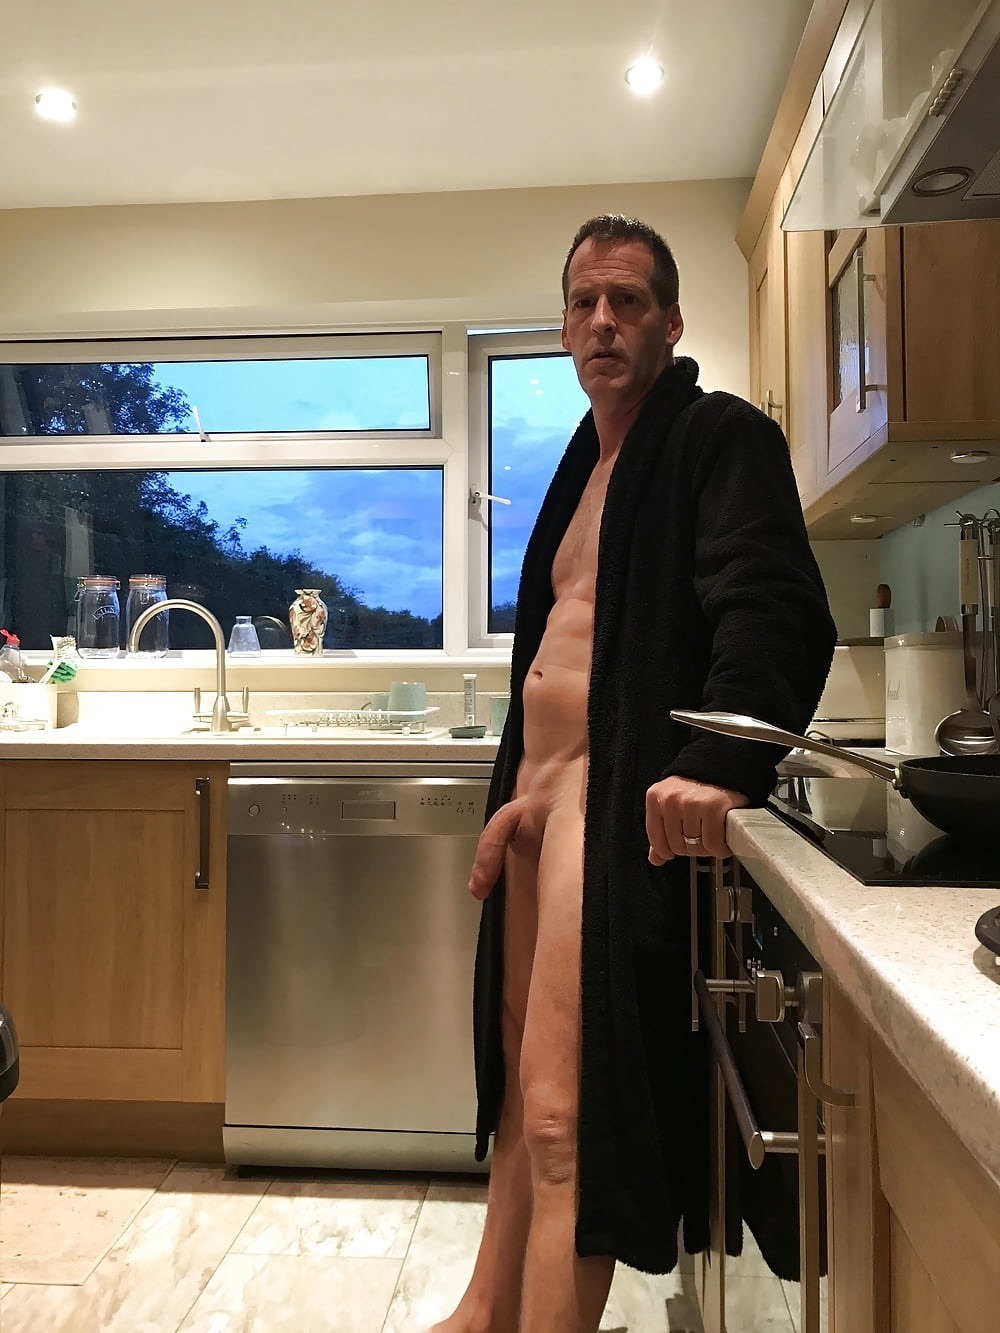 fuckmetx:
â€œI was staying at my best friendâ€™s house, and for some reason I woke with the first light. I went to the kitchen and found his father there, his cock and body on display. â€œOh, I didnâ€™t know anyone was up. I suppose I should close my robe,â€...